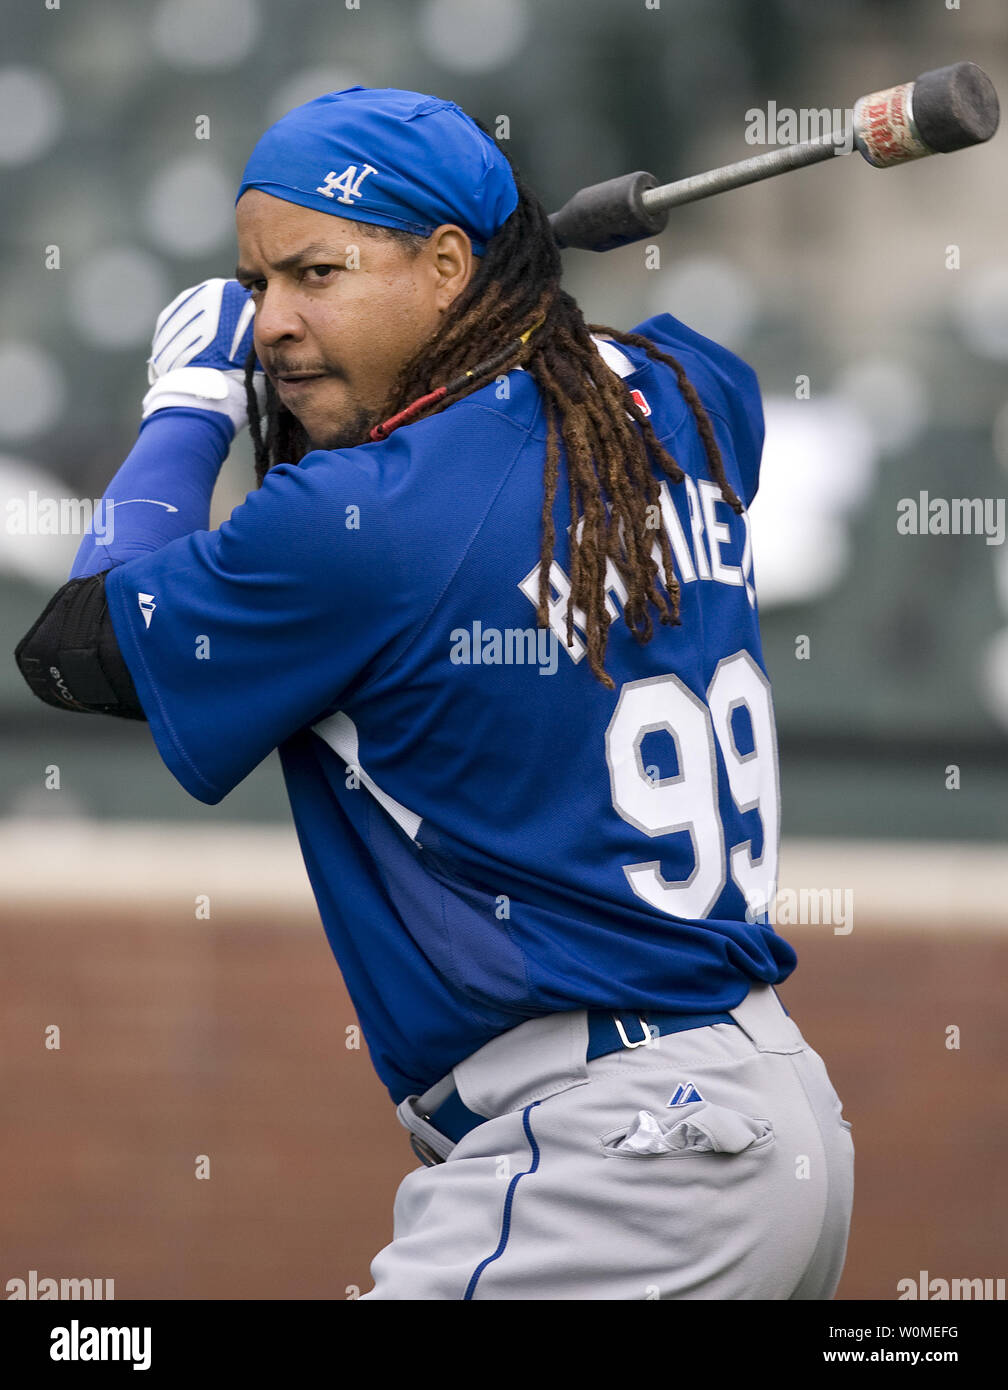 Los Angeles Dodgers left fielder Manny Ramirez, seen in an April 24, 2009 file photo in Denver, has been suspended for 50 games for violating Major League Baseball's drug policy, announced May 7, 2009.    (UPI Photo/Gary C. Caskey/File) Stock Photo